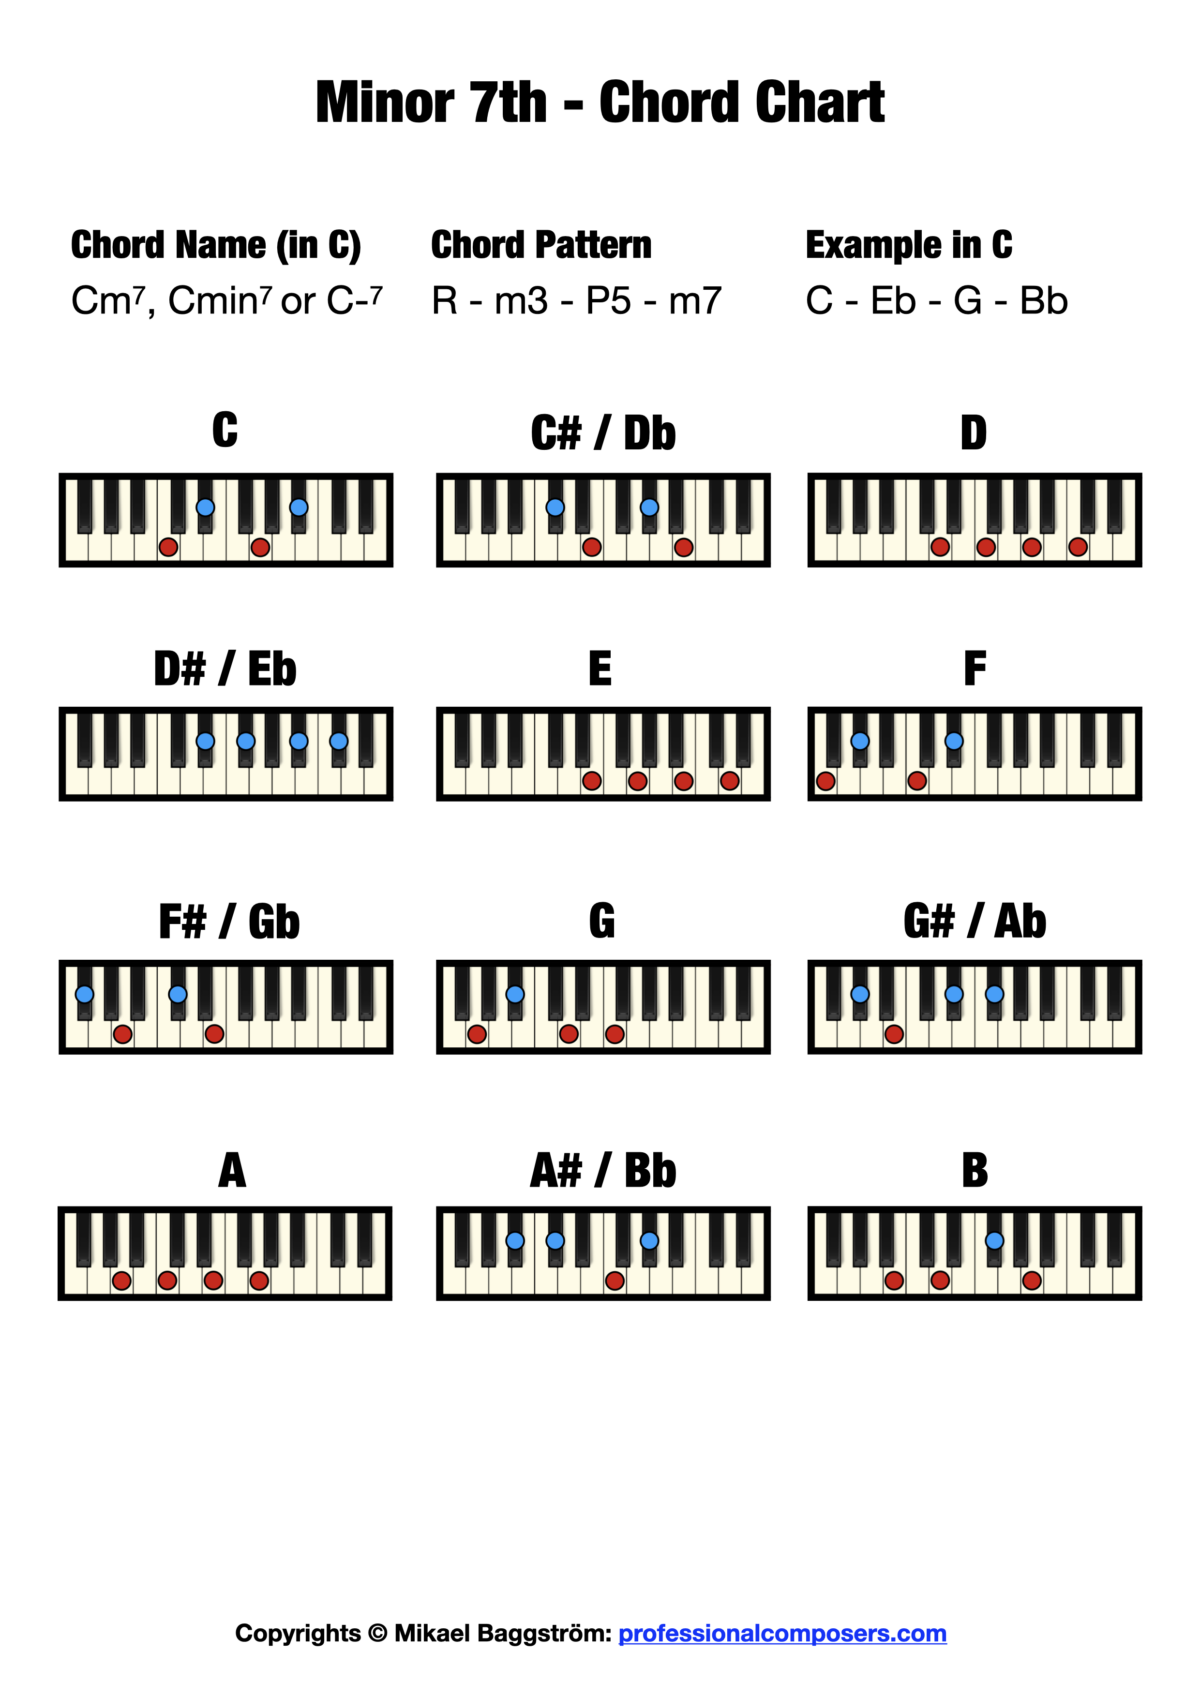 minor-7th-chord-on-piano-free-chord-chart-professional-composers